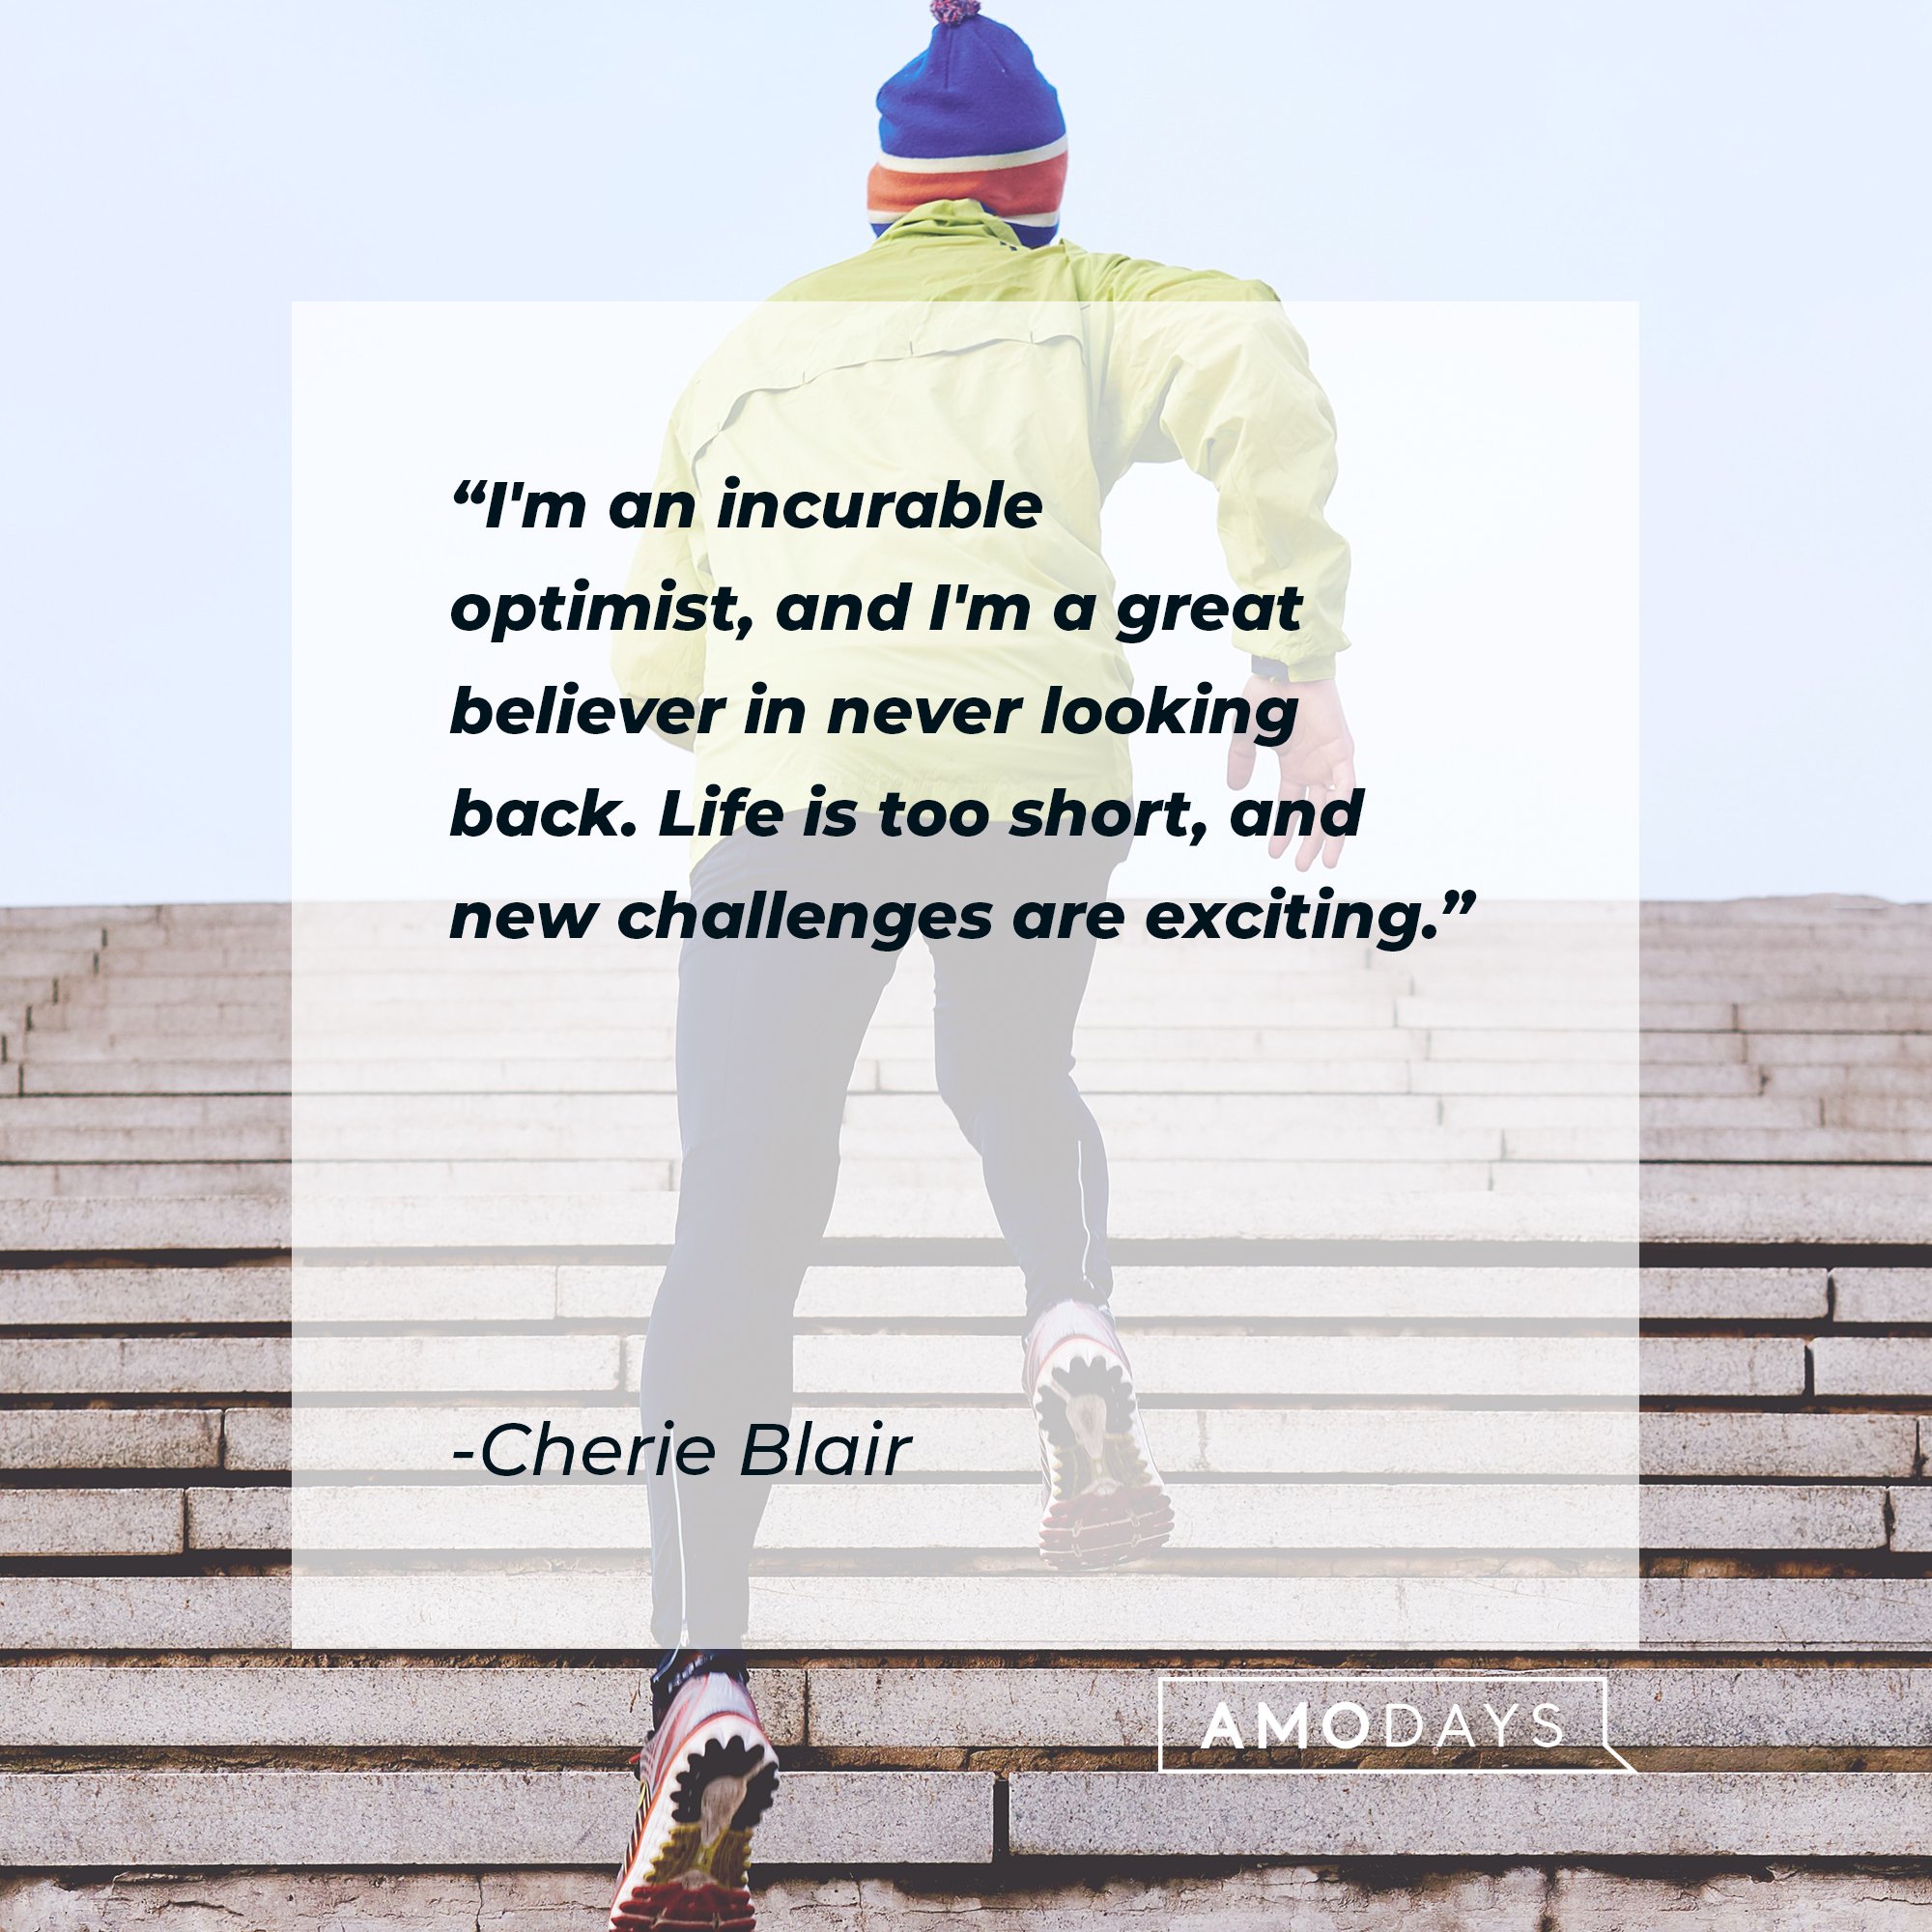  Cherie Blair’s quote: "I'm an incurable optimist, and I'm a great believer in never looking back. Life is too short, and new challenges are exciting." | Image: AmoDays